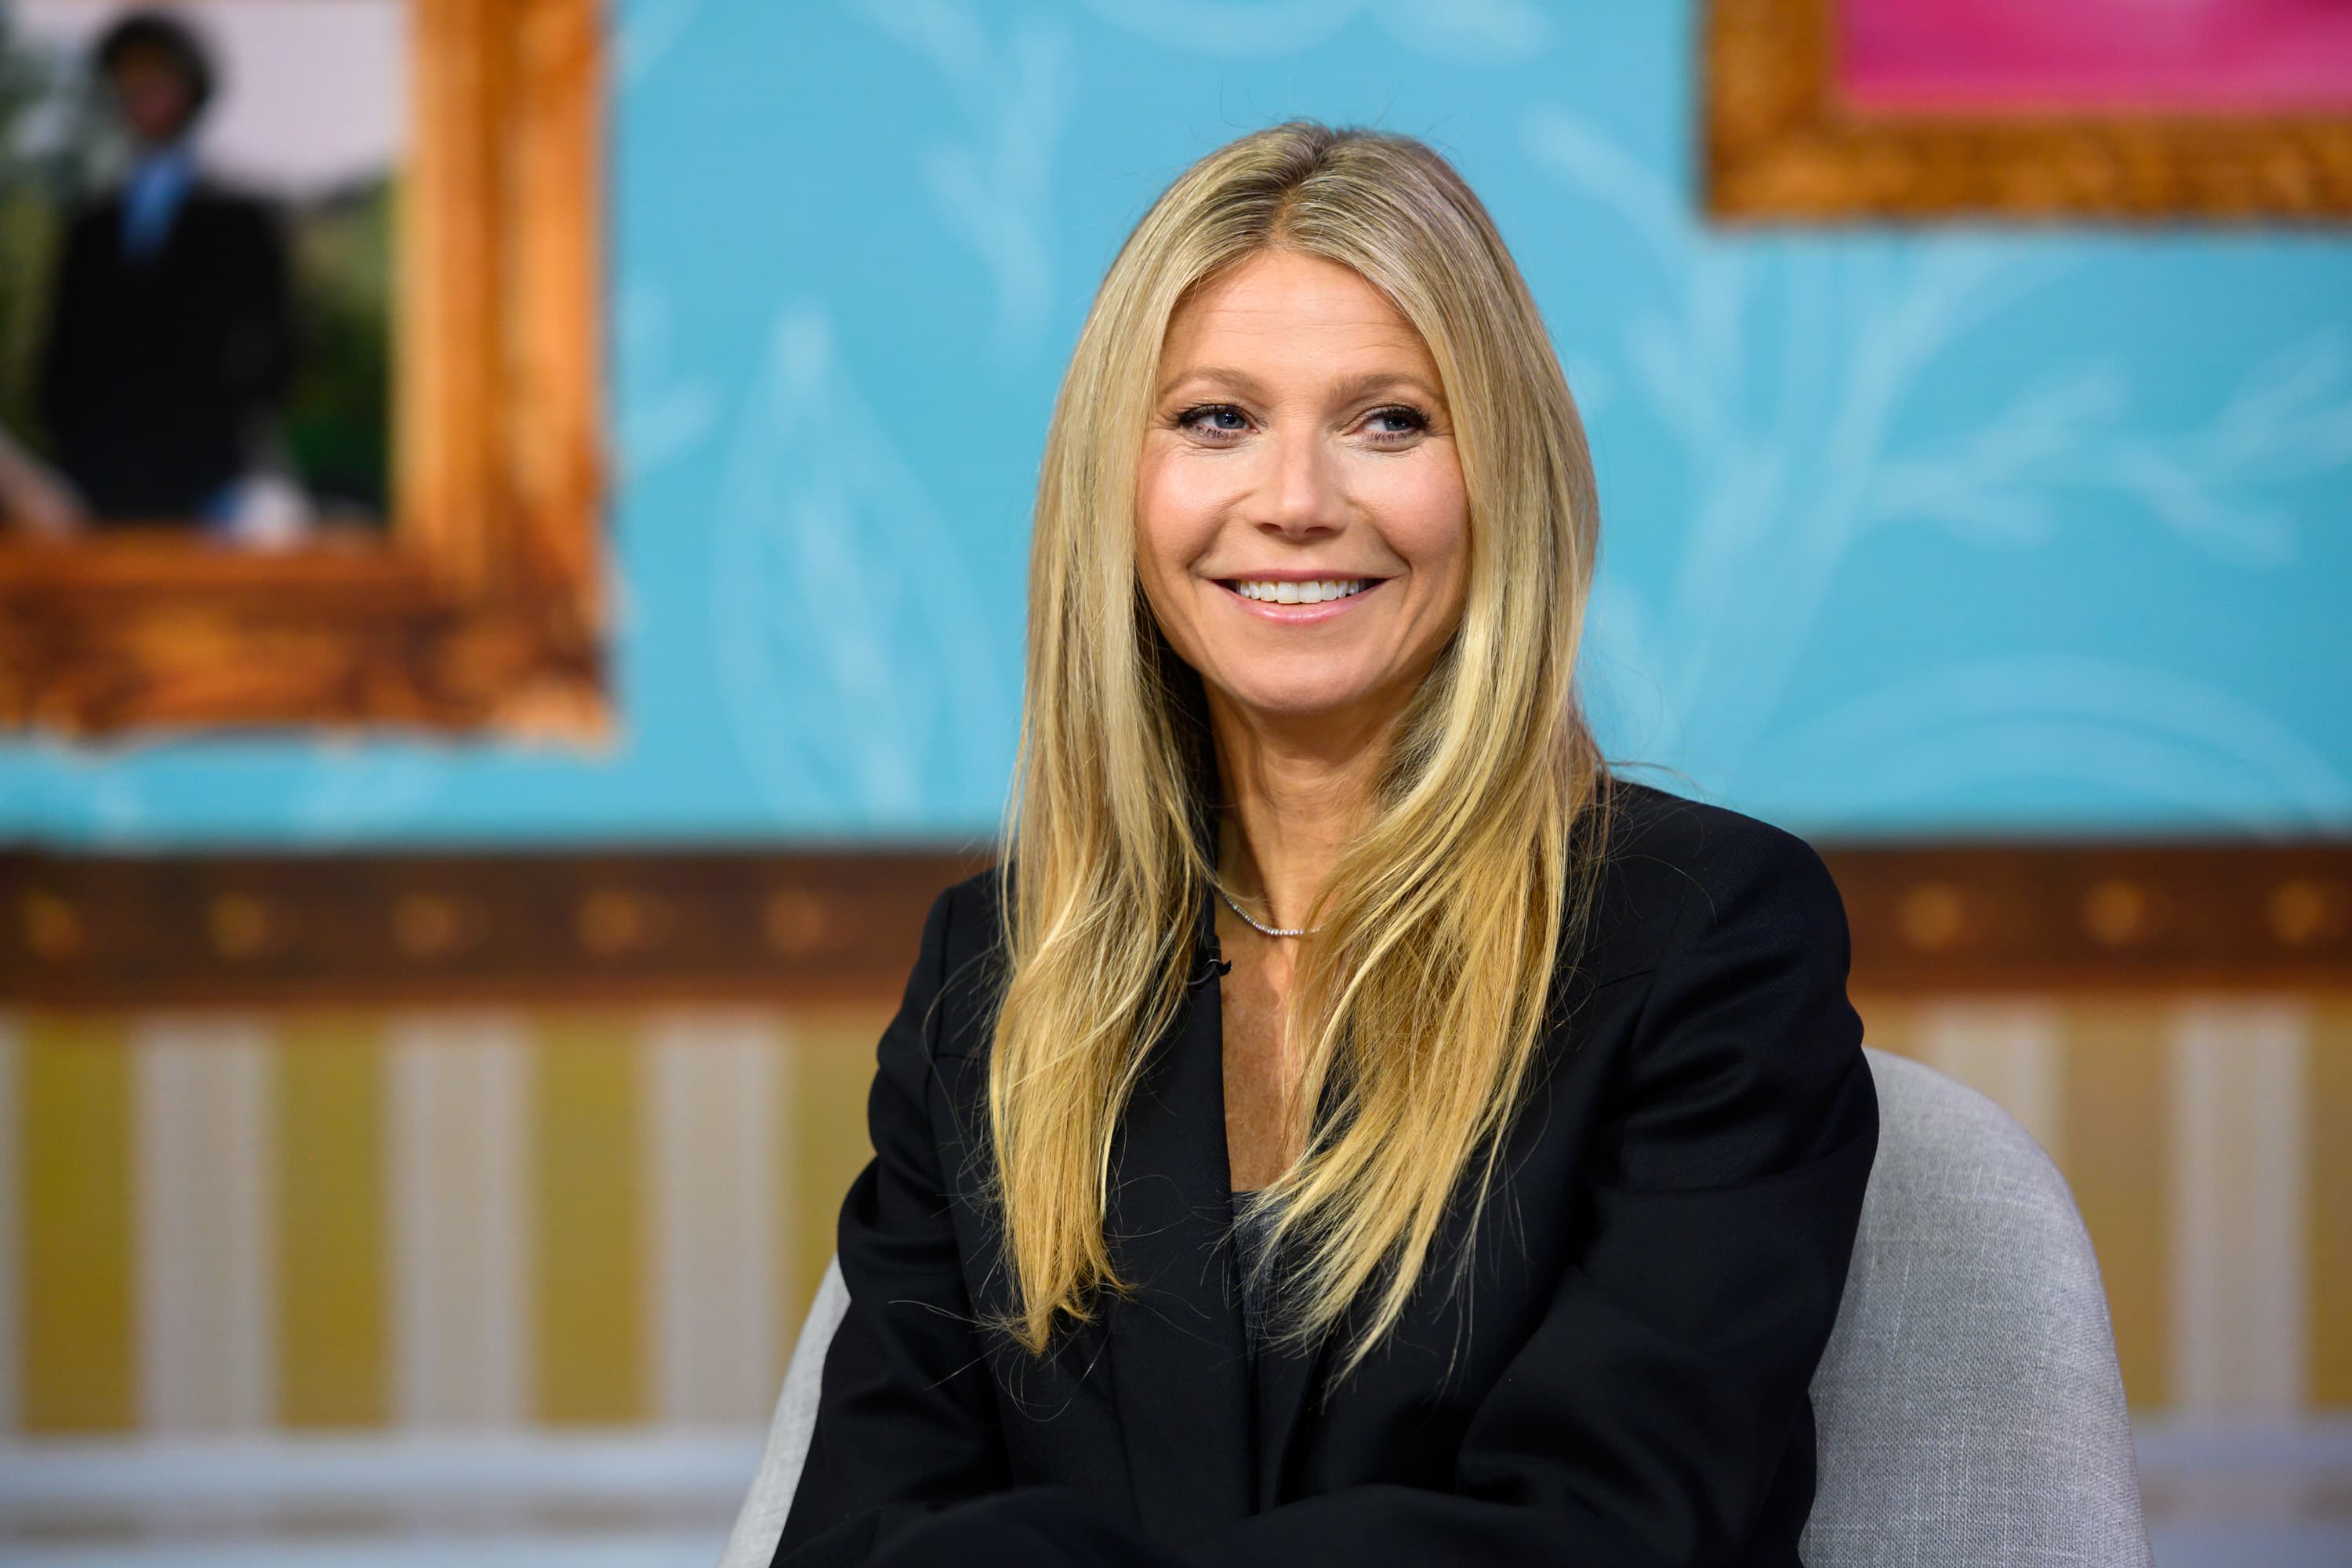 Why Gwyneth Paltrow says this wellness habit is 'one of the healthiest things we can do'